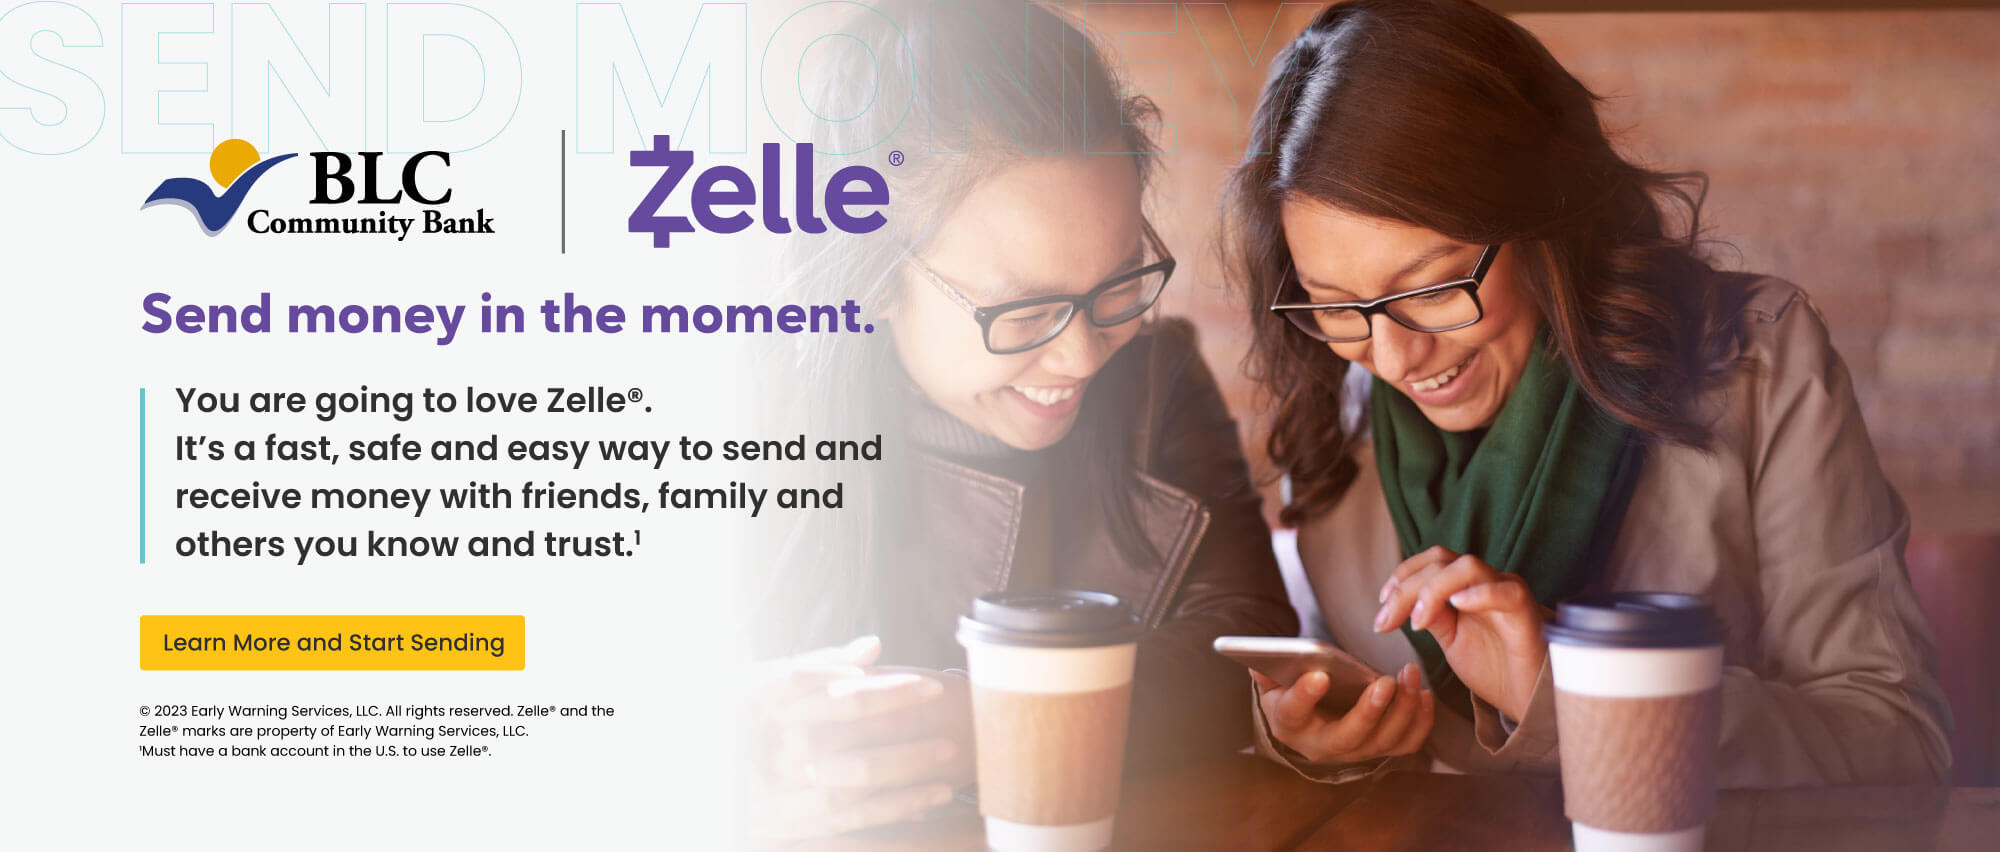 Send money in the moment. You are going to love ZelleÃƒÆ’Ã¢â‚¬Å¡Ãƒâ€šÃ‚Â®. It's a fast, safe and easy way to send and receive money with friends, family and others you know and trust. Learn more and start sending  ÃƒÆ’Ã†â€™Ãƒâ€ Ã¢â‚¬â„¢ÃƒÆ’Ã‚Â¢ÃƒÂ¢Ã¢â‚¬Å¡Ã‚Â¬Ãƒâ€¦Ã‚Â¡ÃƒÆ’Ã†â€™ÃƒÂ¢Ã¢â€šÂ¬Ã…Â¡ÃƒÆ’Ã¢â‚¬Å¡Ãƒâ€šÃ‚Â©2023 early warning services, llc. all rights reserved, zelle and the zelle marks are property of early warning services, llc. 1 must have a bank account in the U.S. to use zelle.